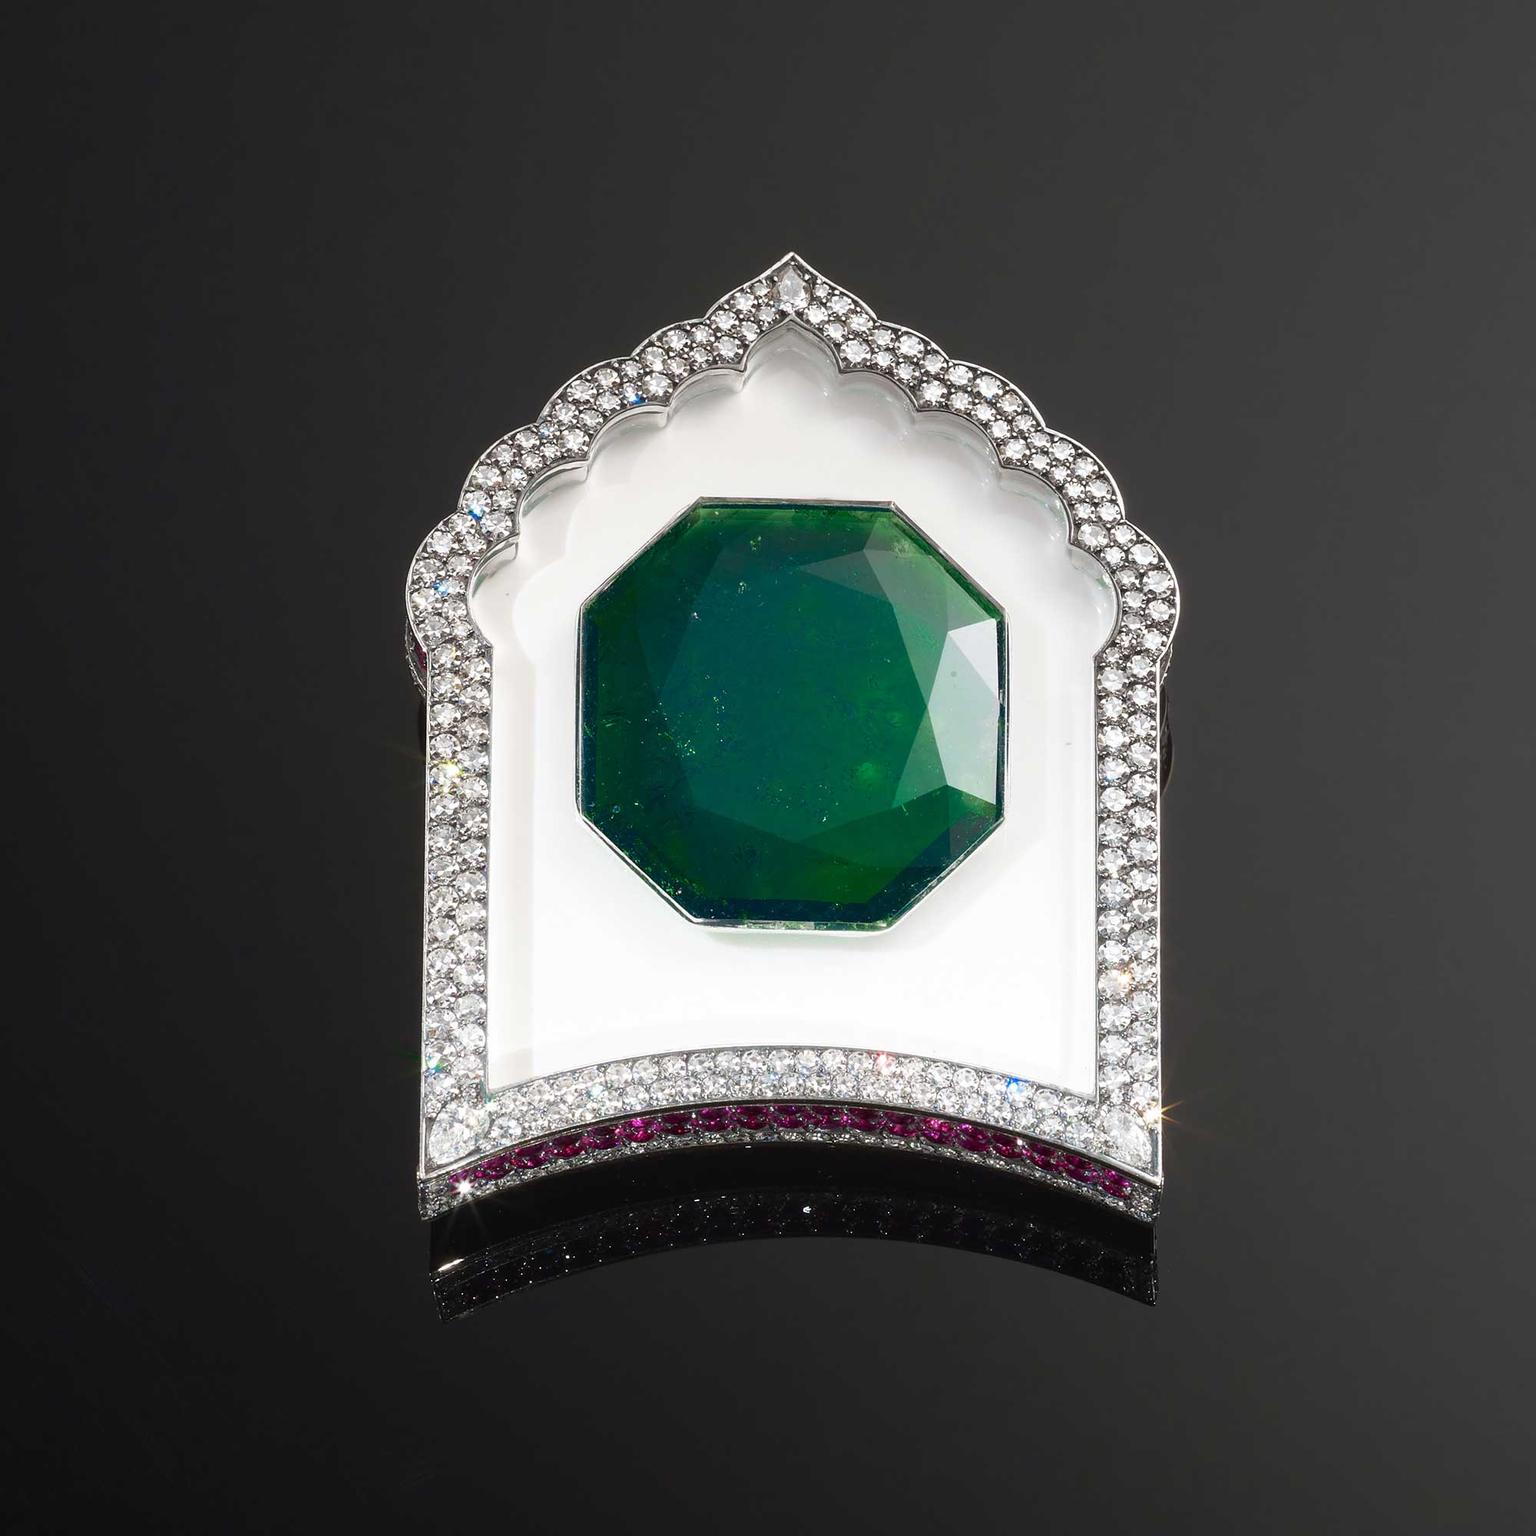 JAR emerald brooch, on show at the Bejewelled Treasures exhibition at the V&A